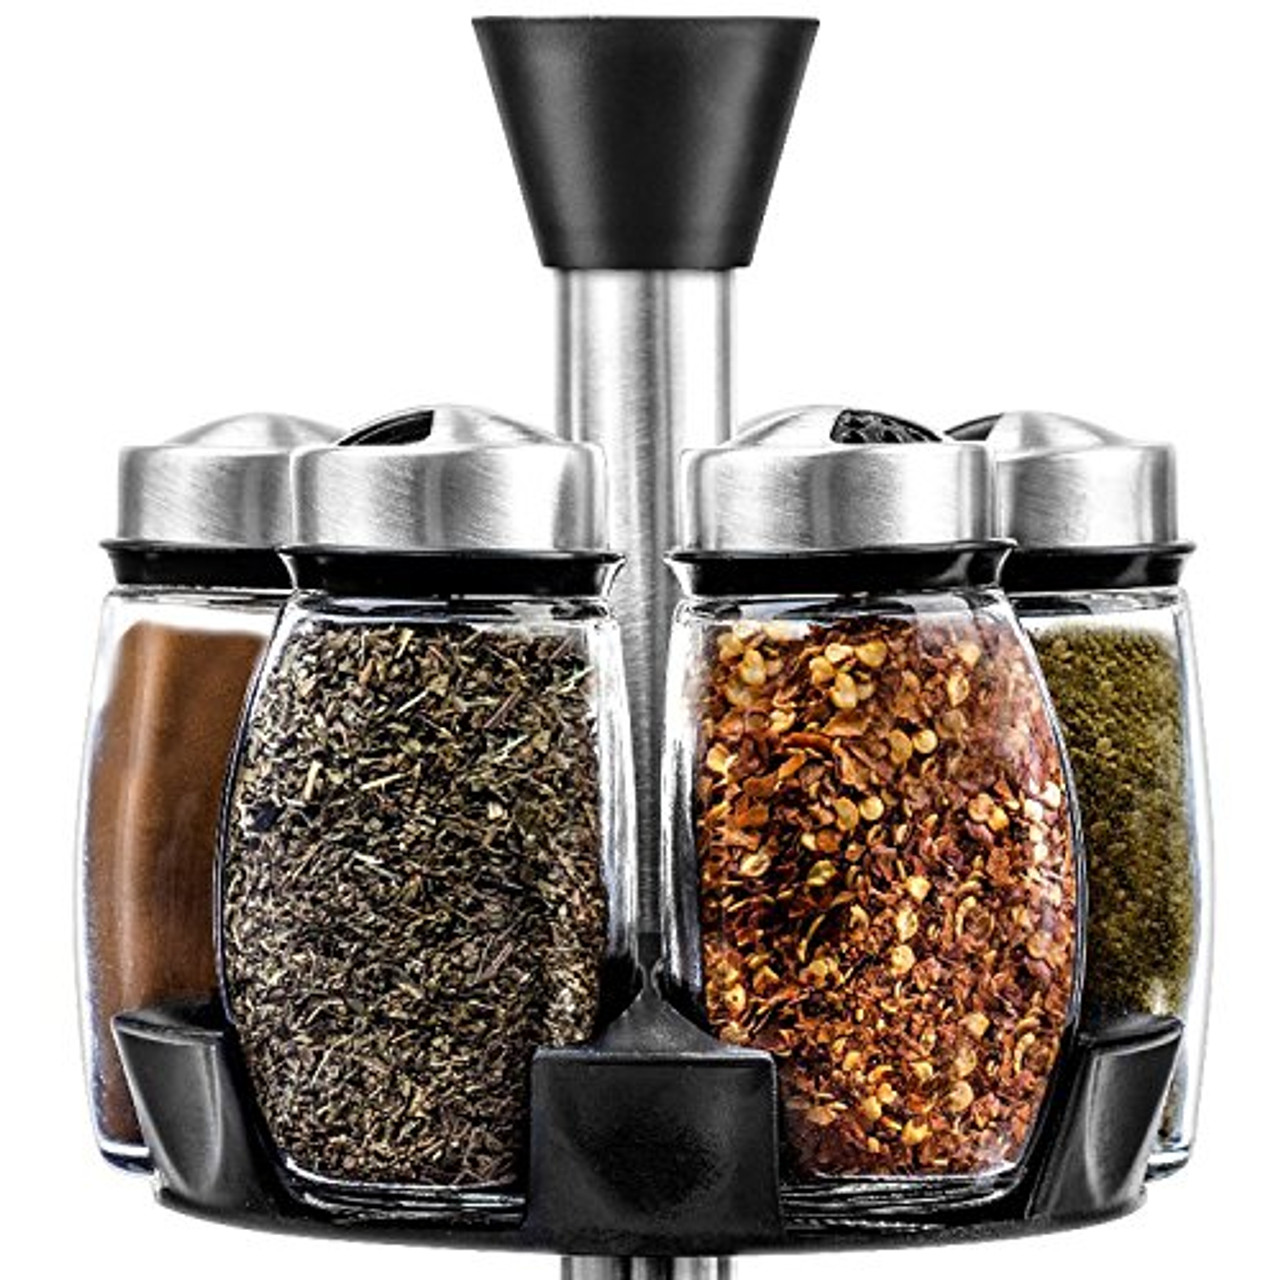 Belwares Revolving Spice Rack Organizer - Spinning Countertop Herb and  Spice Organizer with 12 Glass Jar Bottles and Labels (Spices Not Included)